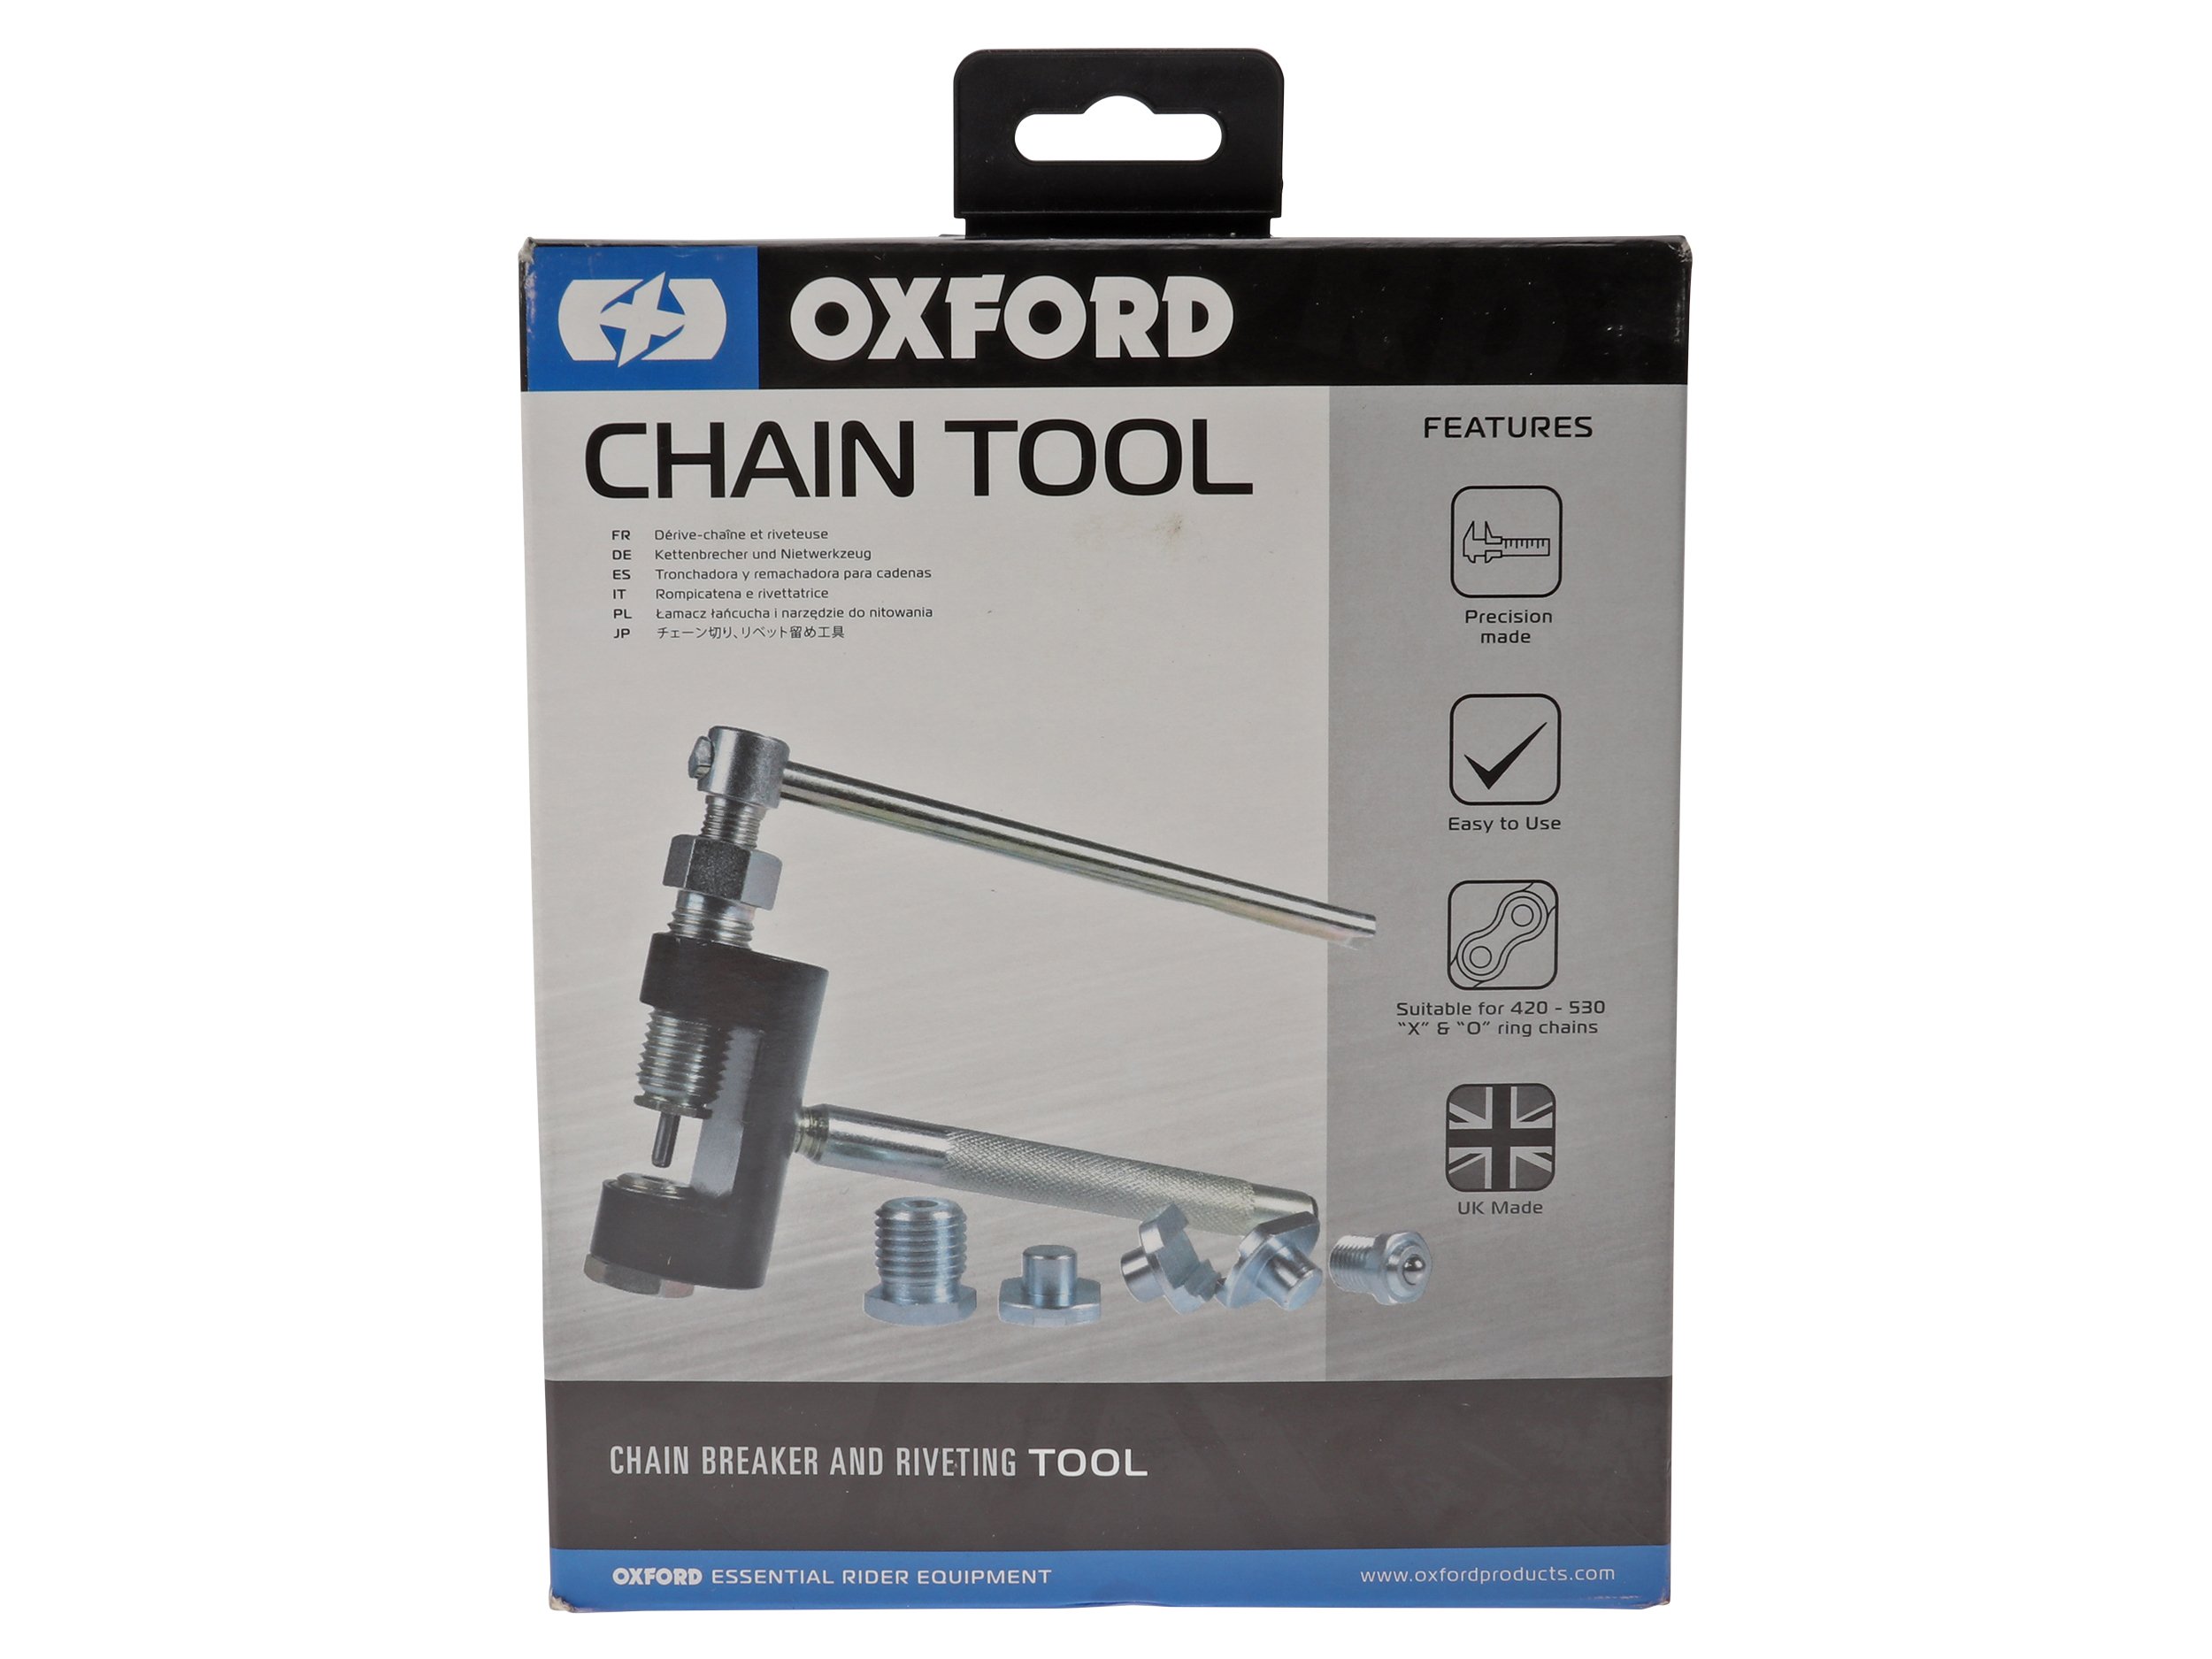 Oxford Chain Tool 3 in 1